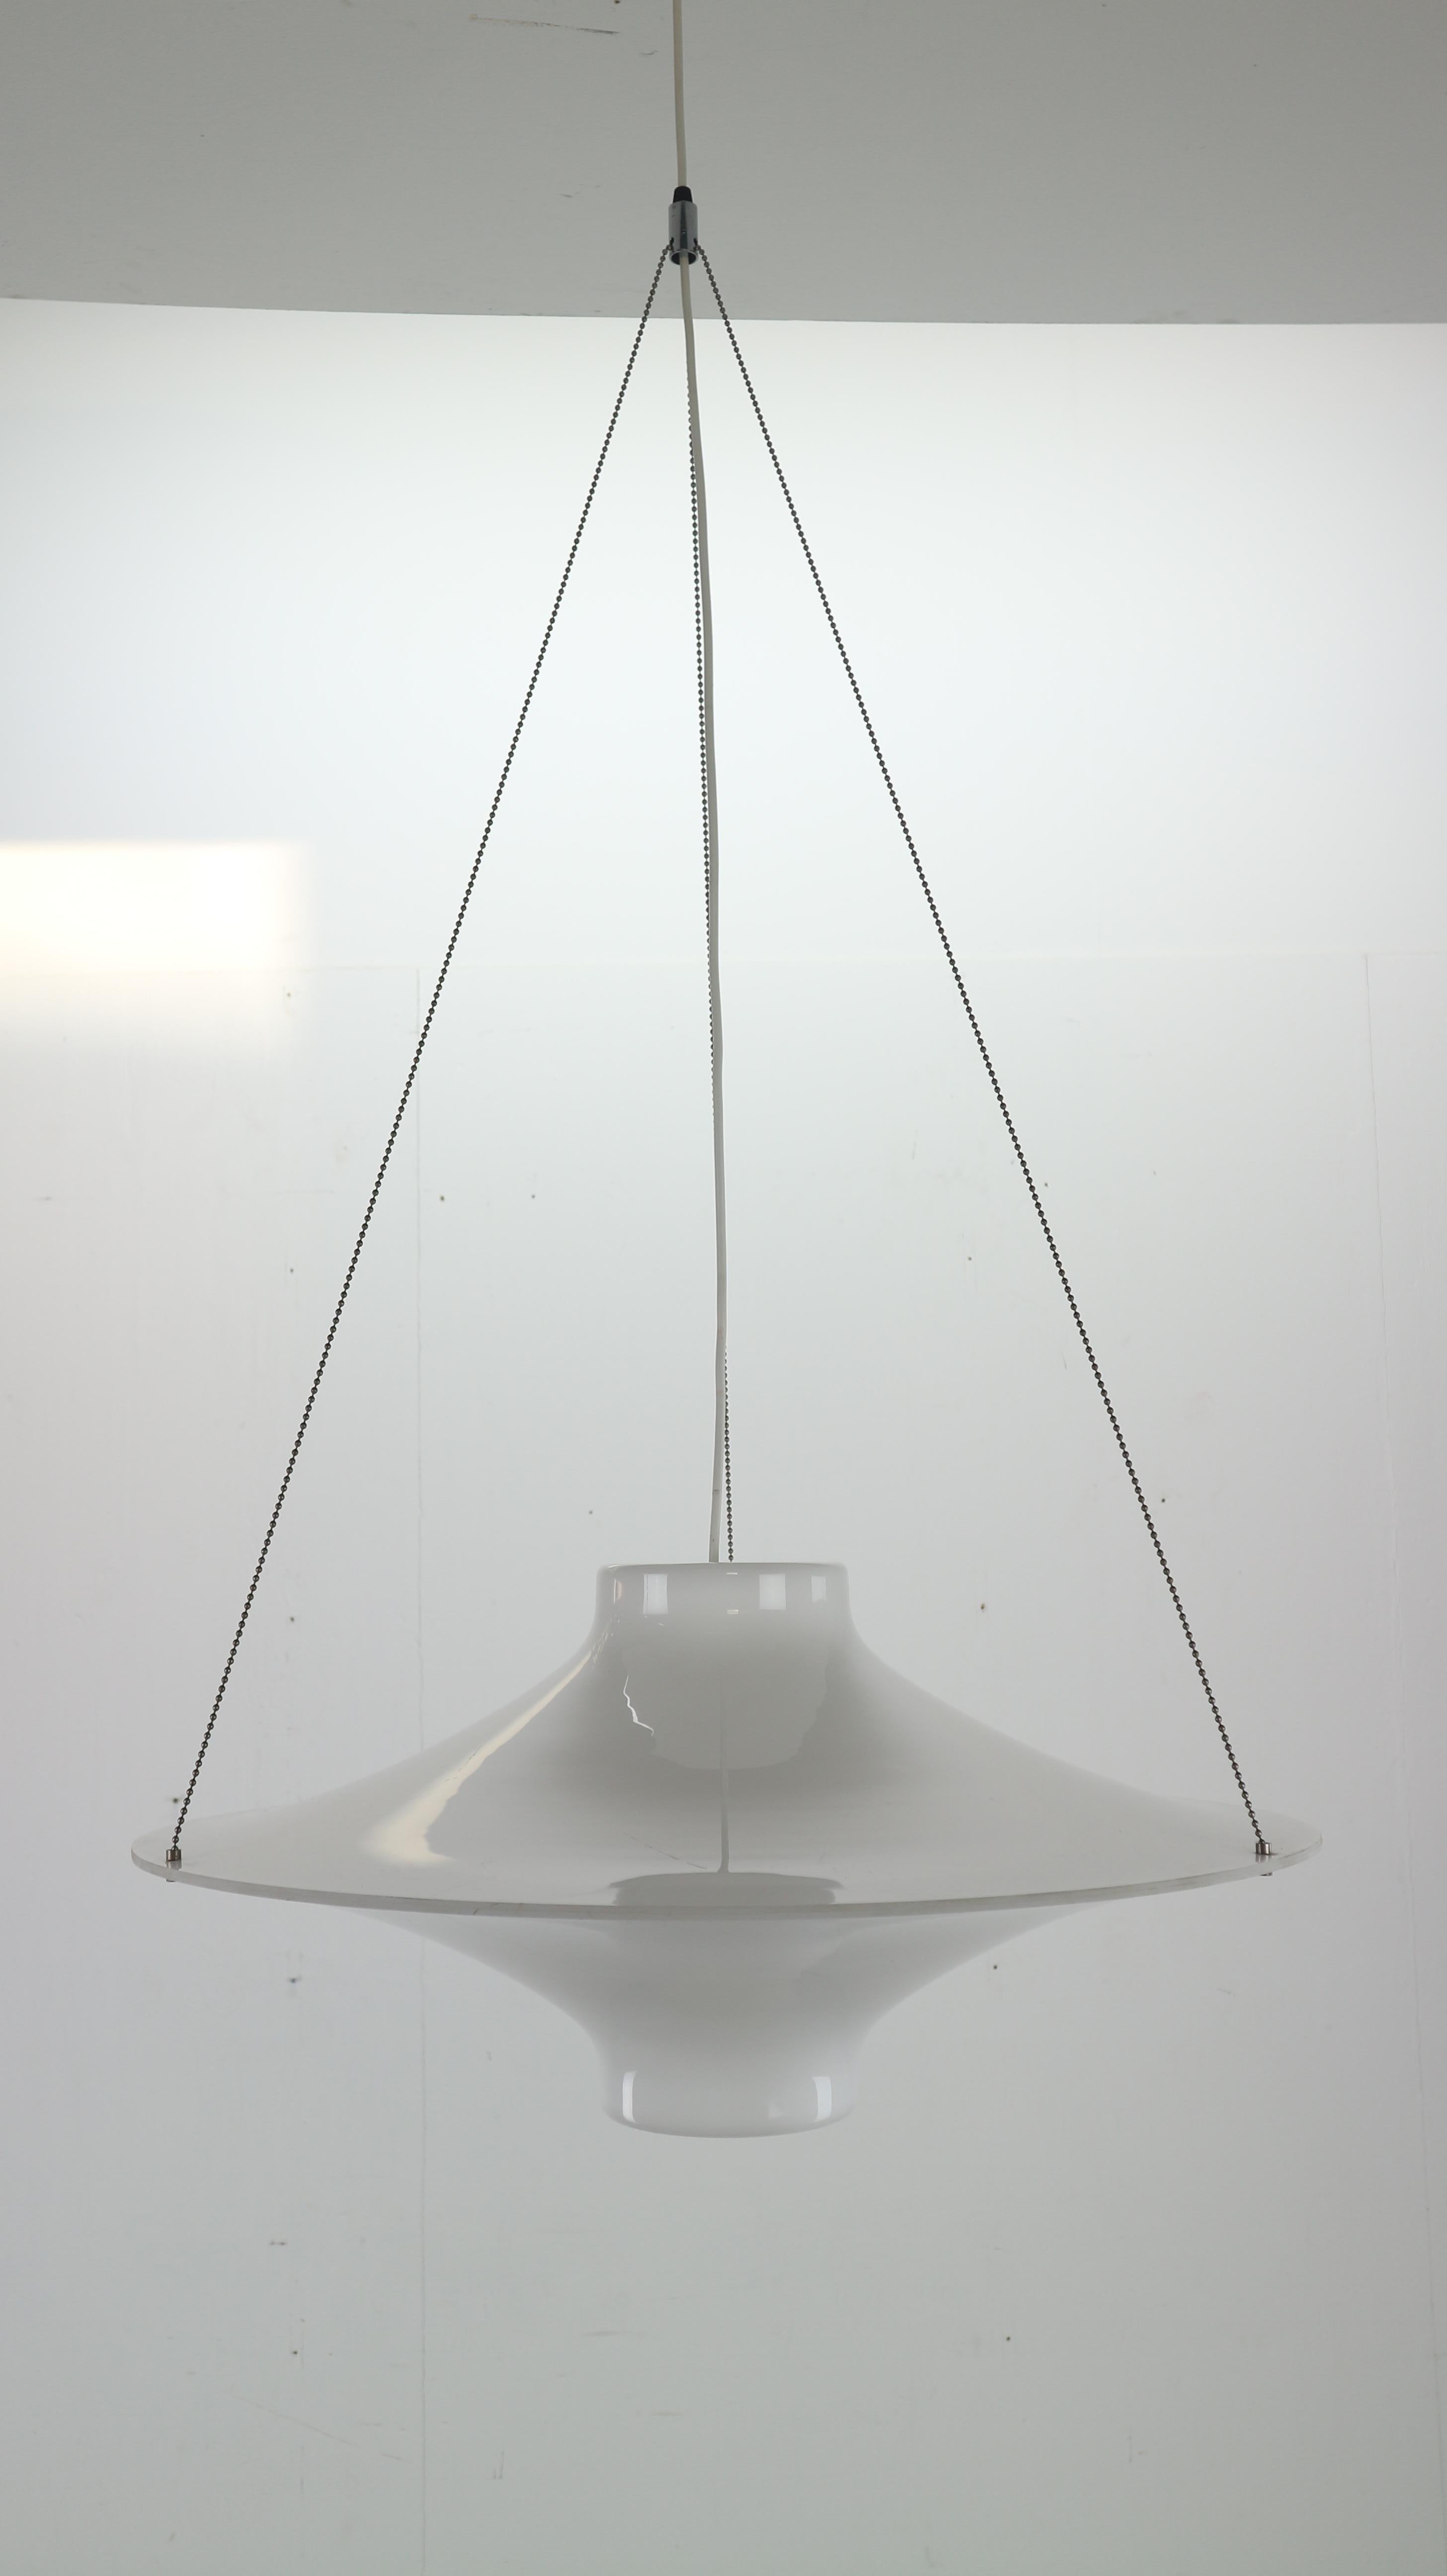 The 'Skyflyer' is designed by Yki Nummi in 1960. Yki Nummi was famous for his early use of acrylics in his designs.
Skyflyer hanging lamp is comprised of two-piece shade made of molded opaque acrylic, and suspension chain. Thanks to the bulb